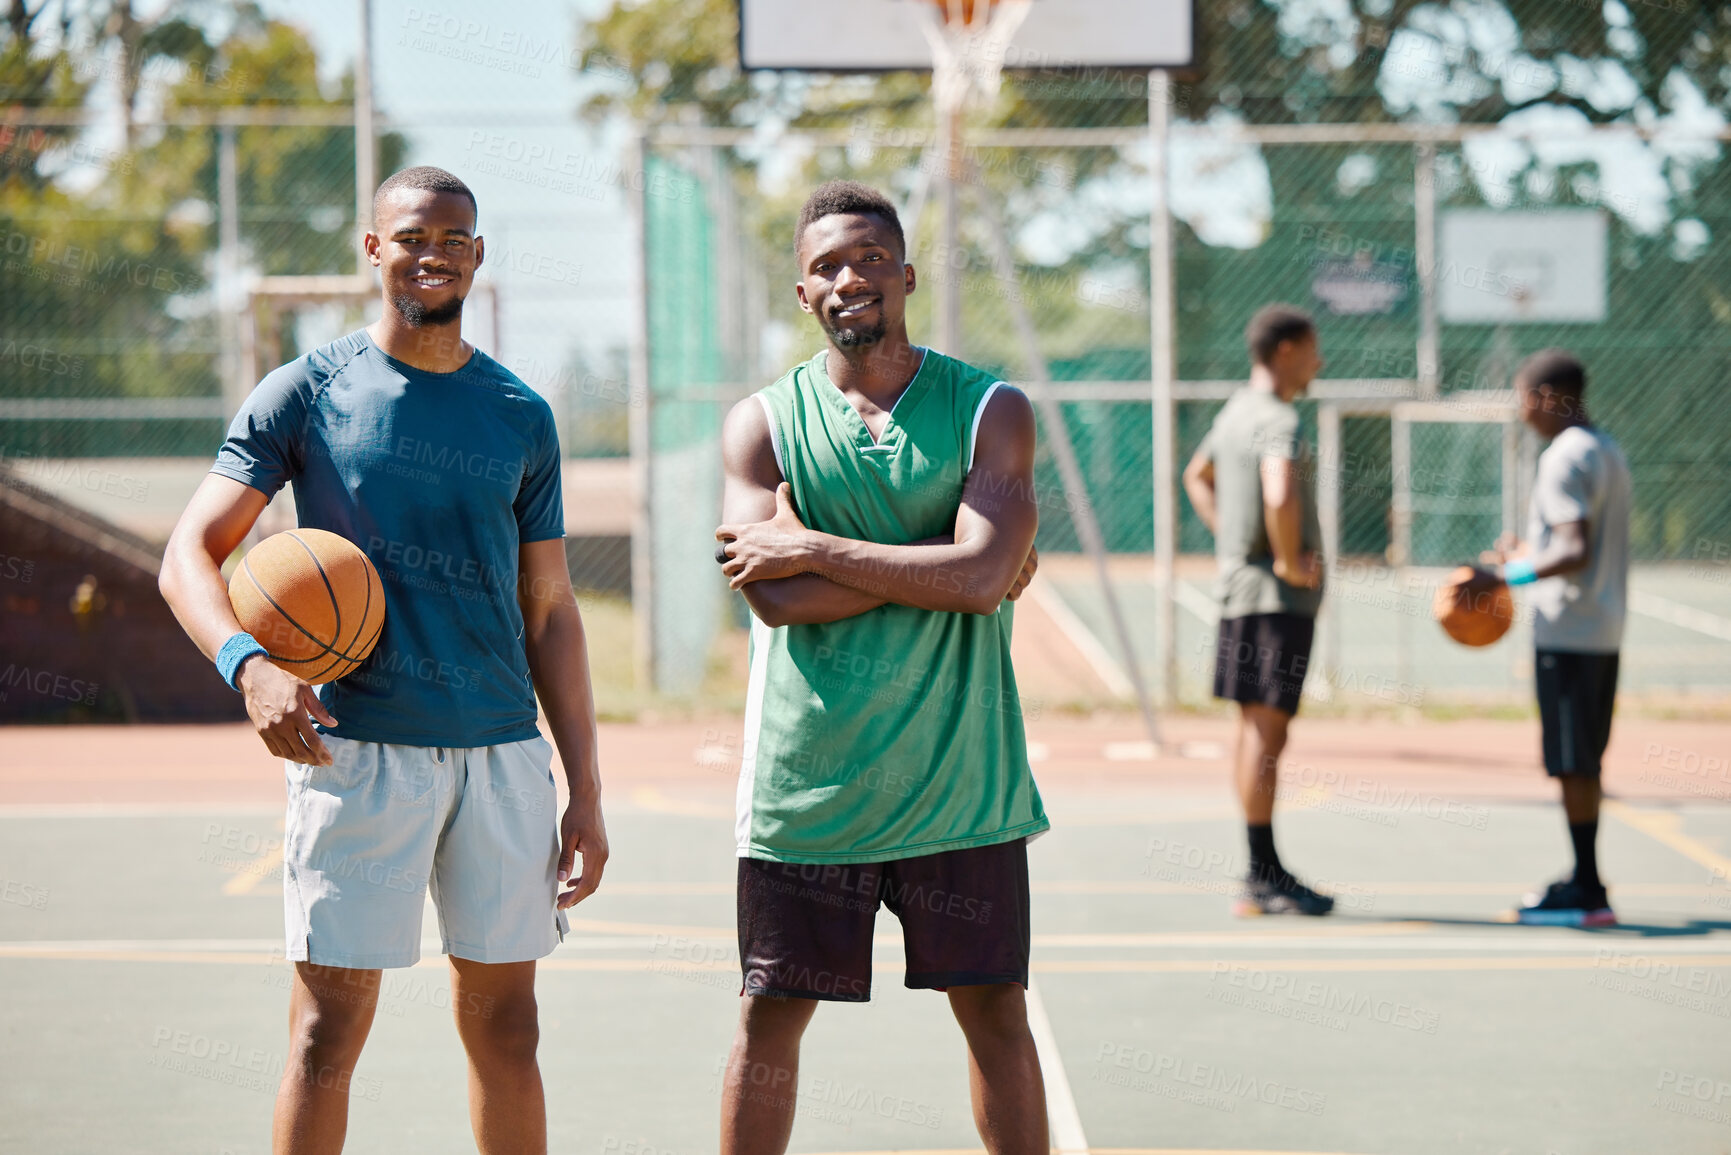 Buy stock photo Sports, friends and portrait on basketball court for workout, fitness and athlete training. Basketball player, wellness and happy black people together on outdoor sport court for exercise.

